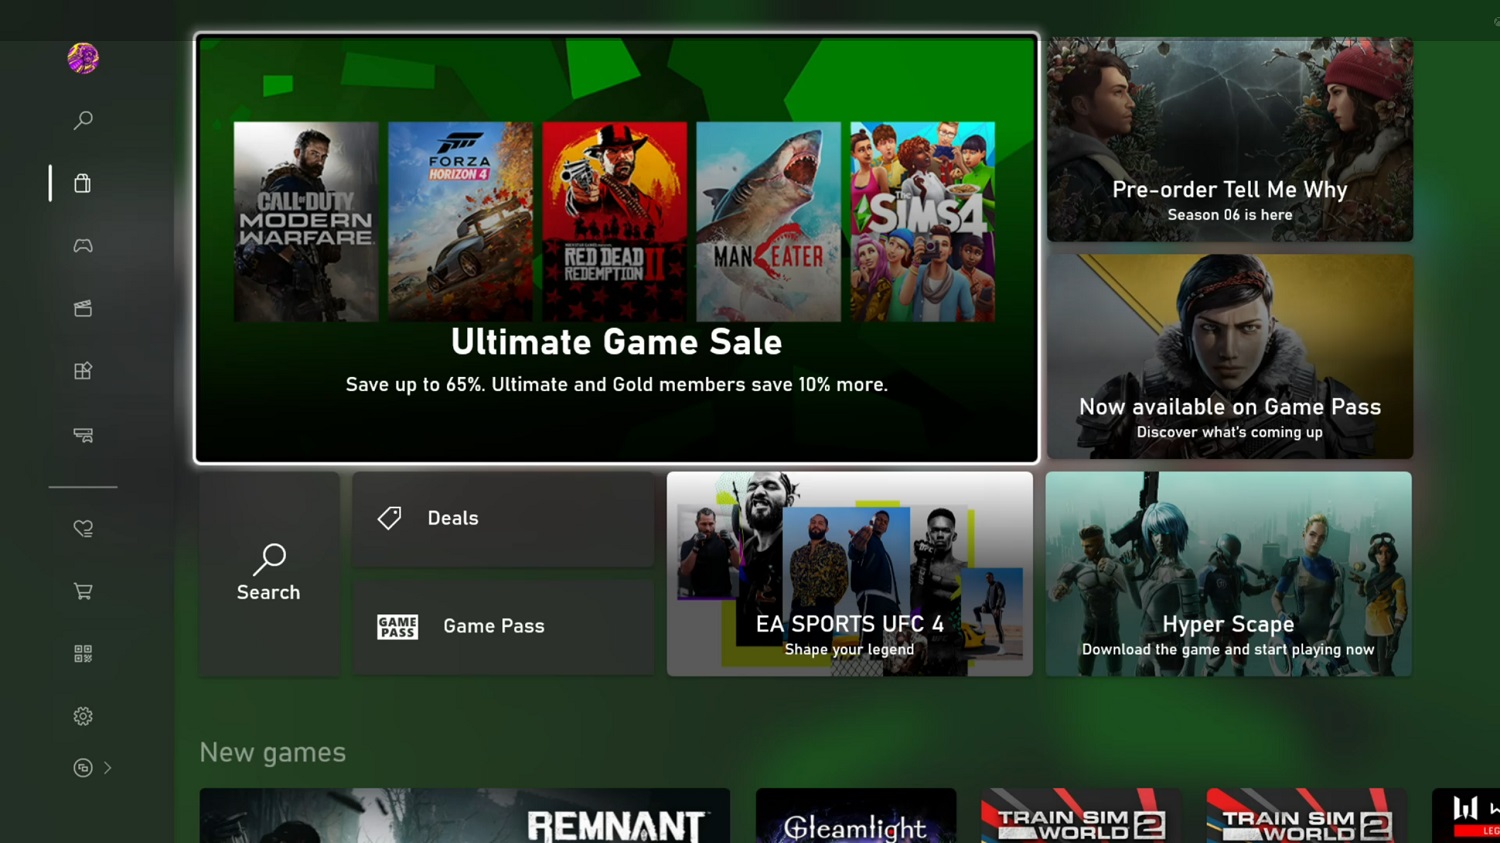 Xboxie is an optimized site for the Xbox One, lets you play HTML5